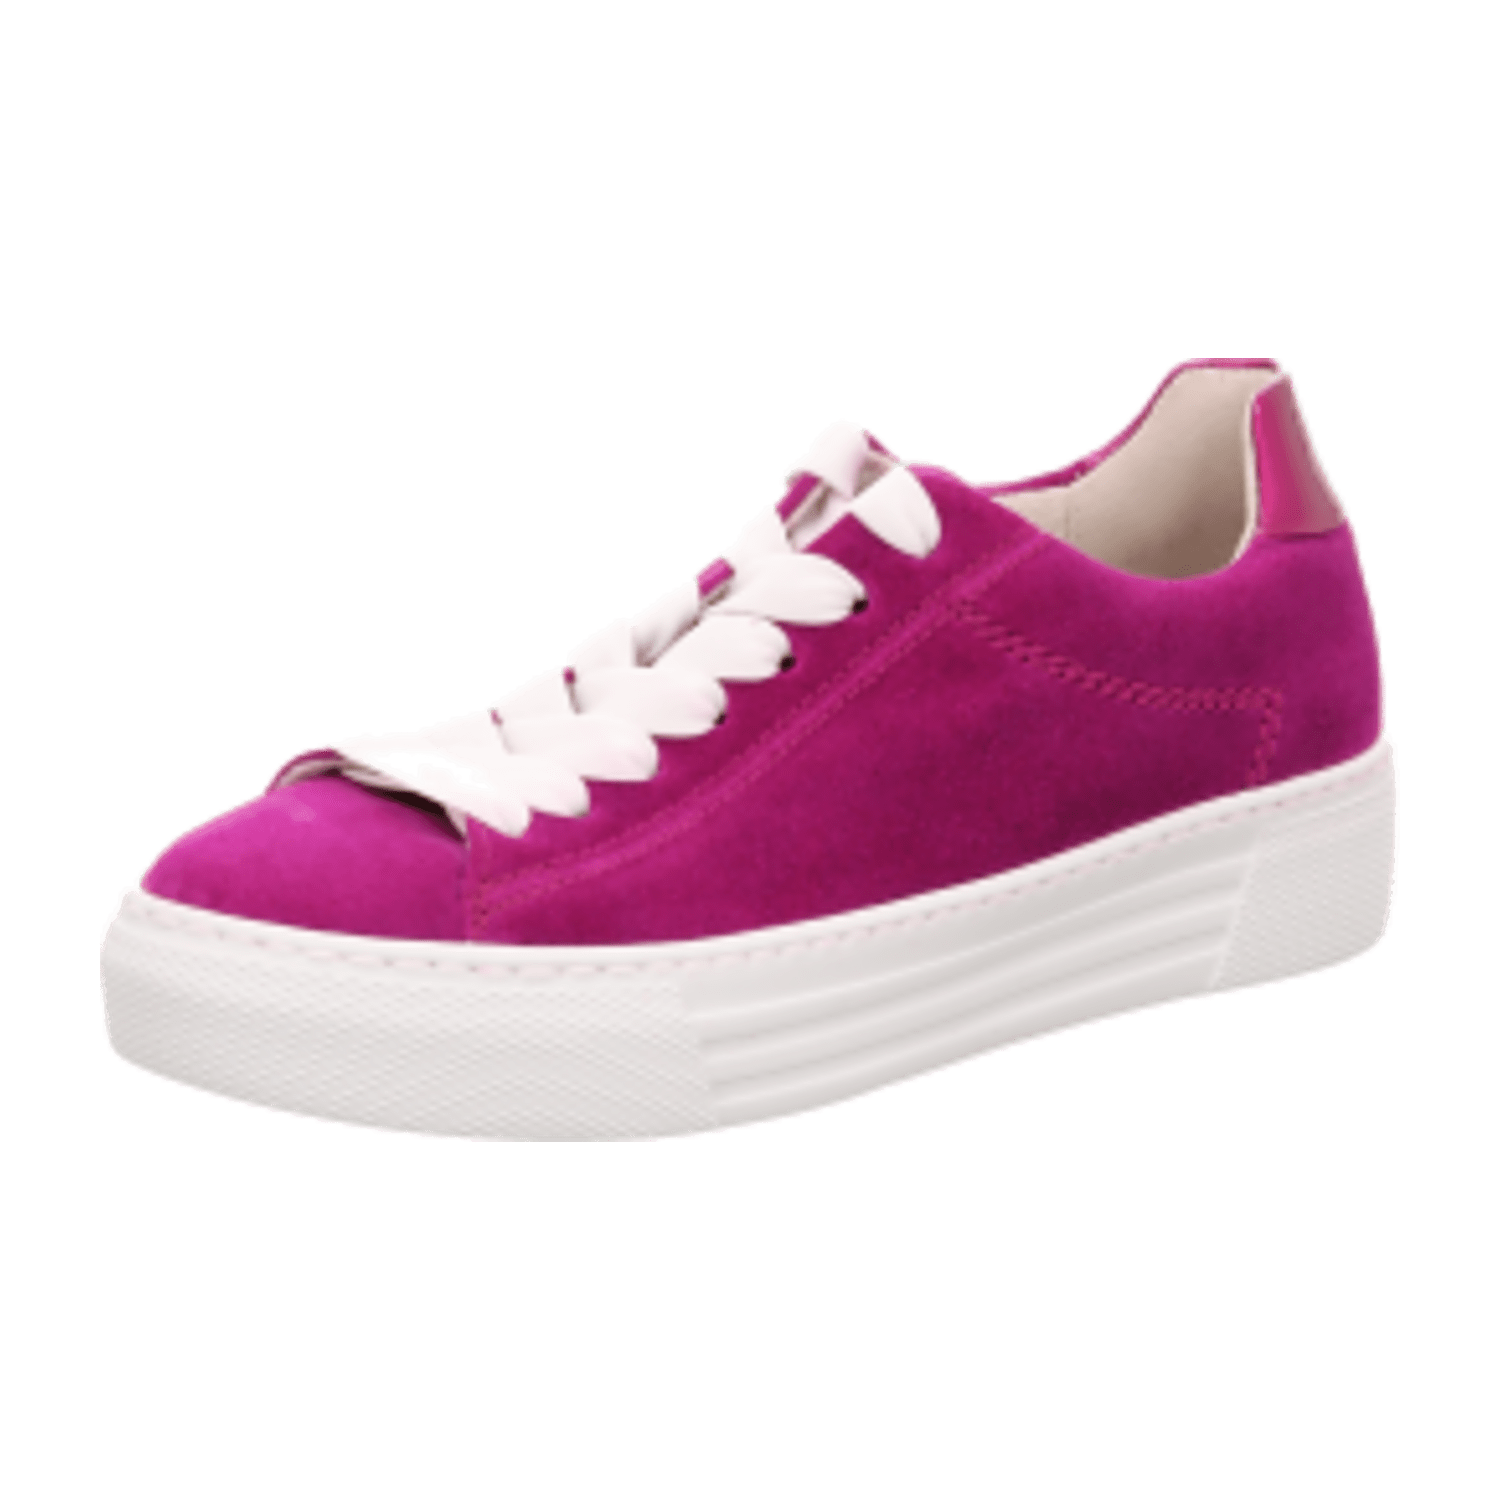 Gabor comfort Schuhe lila aster Plateau Sneakers 46.460.49